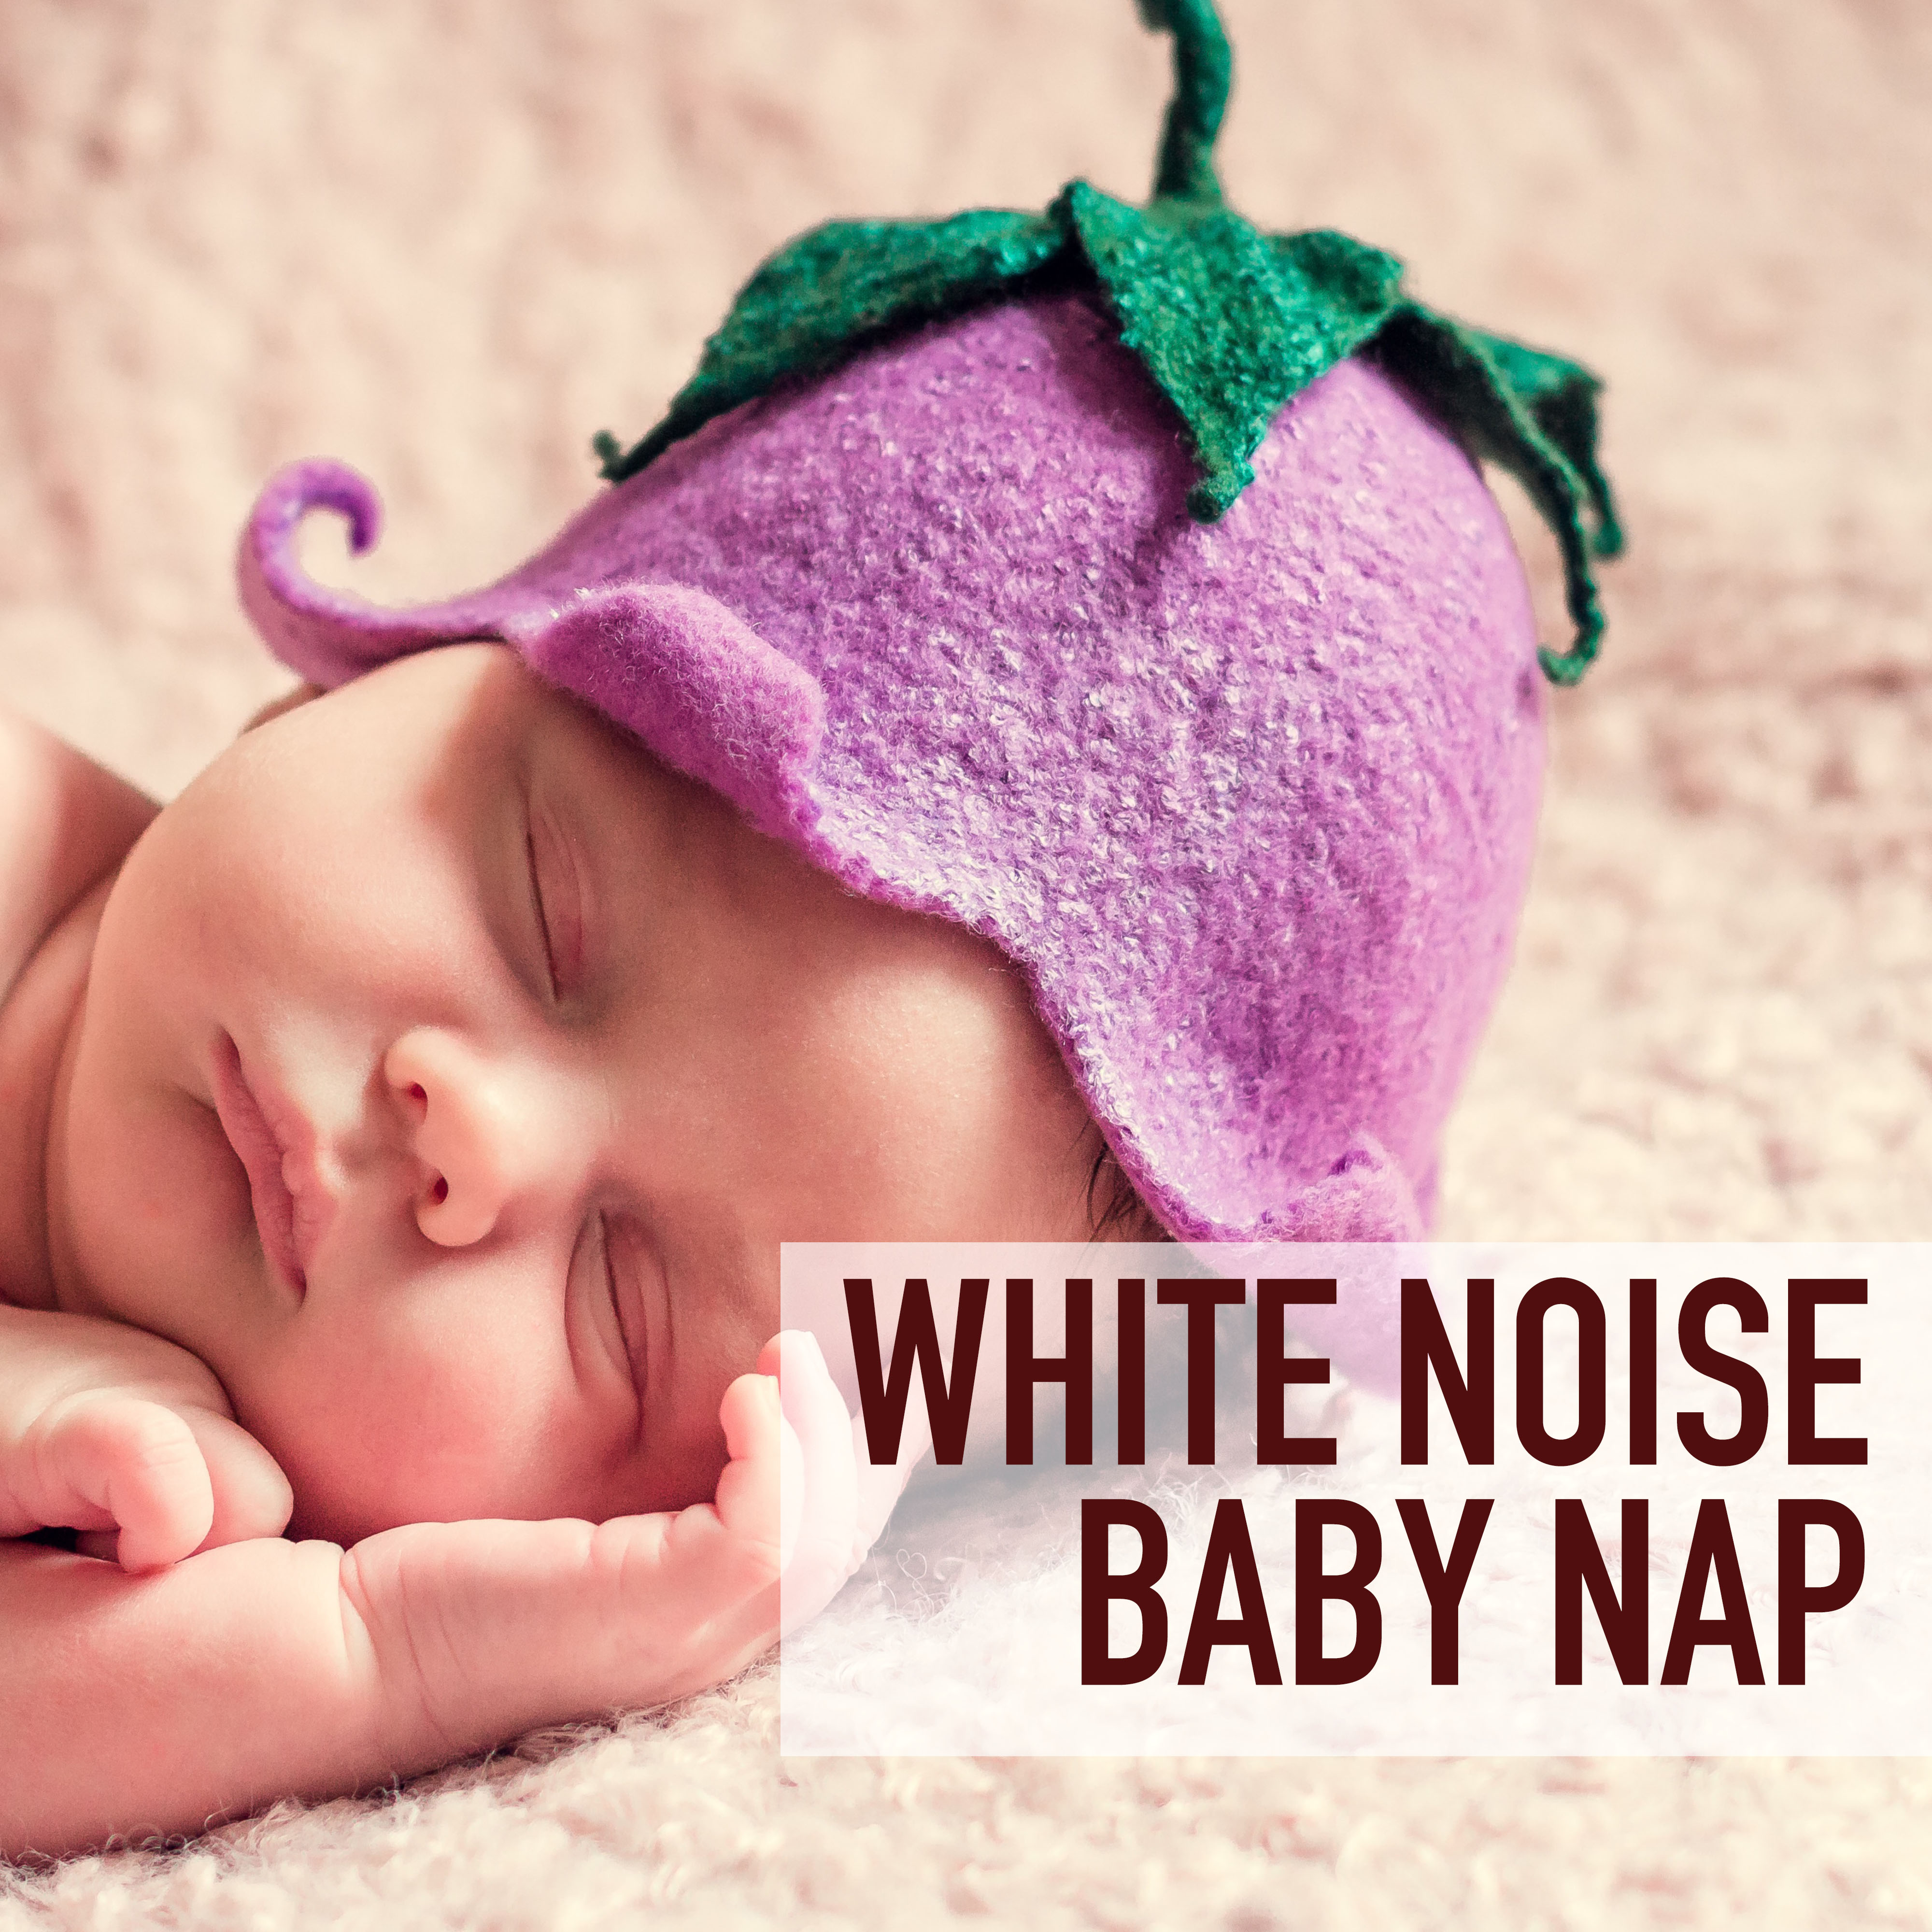 White Noise Baby Nap - Naptime Preschool Toddler and Babies Soothing and Relaxing Music